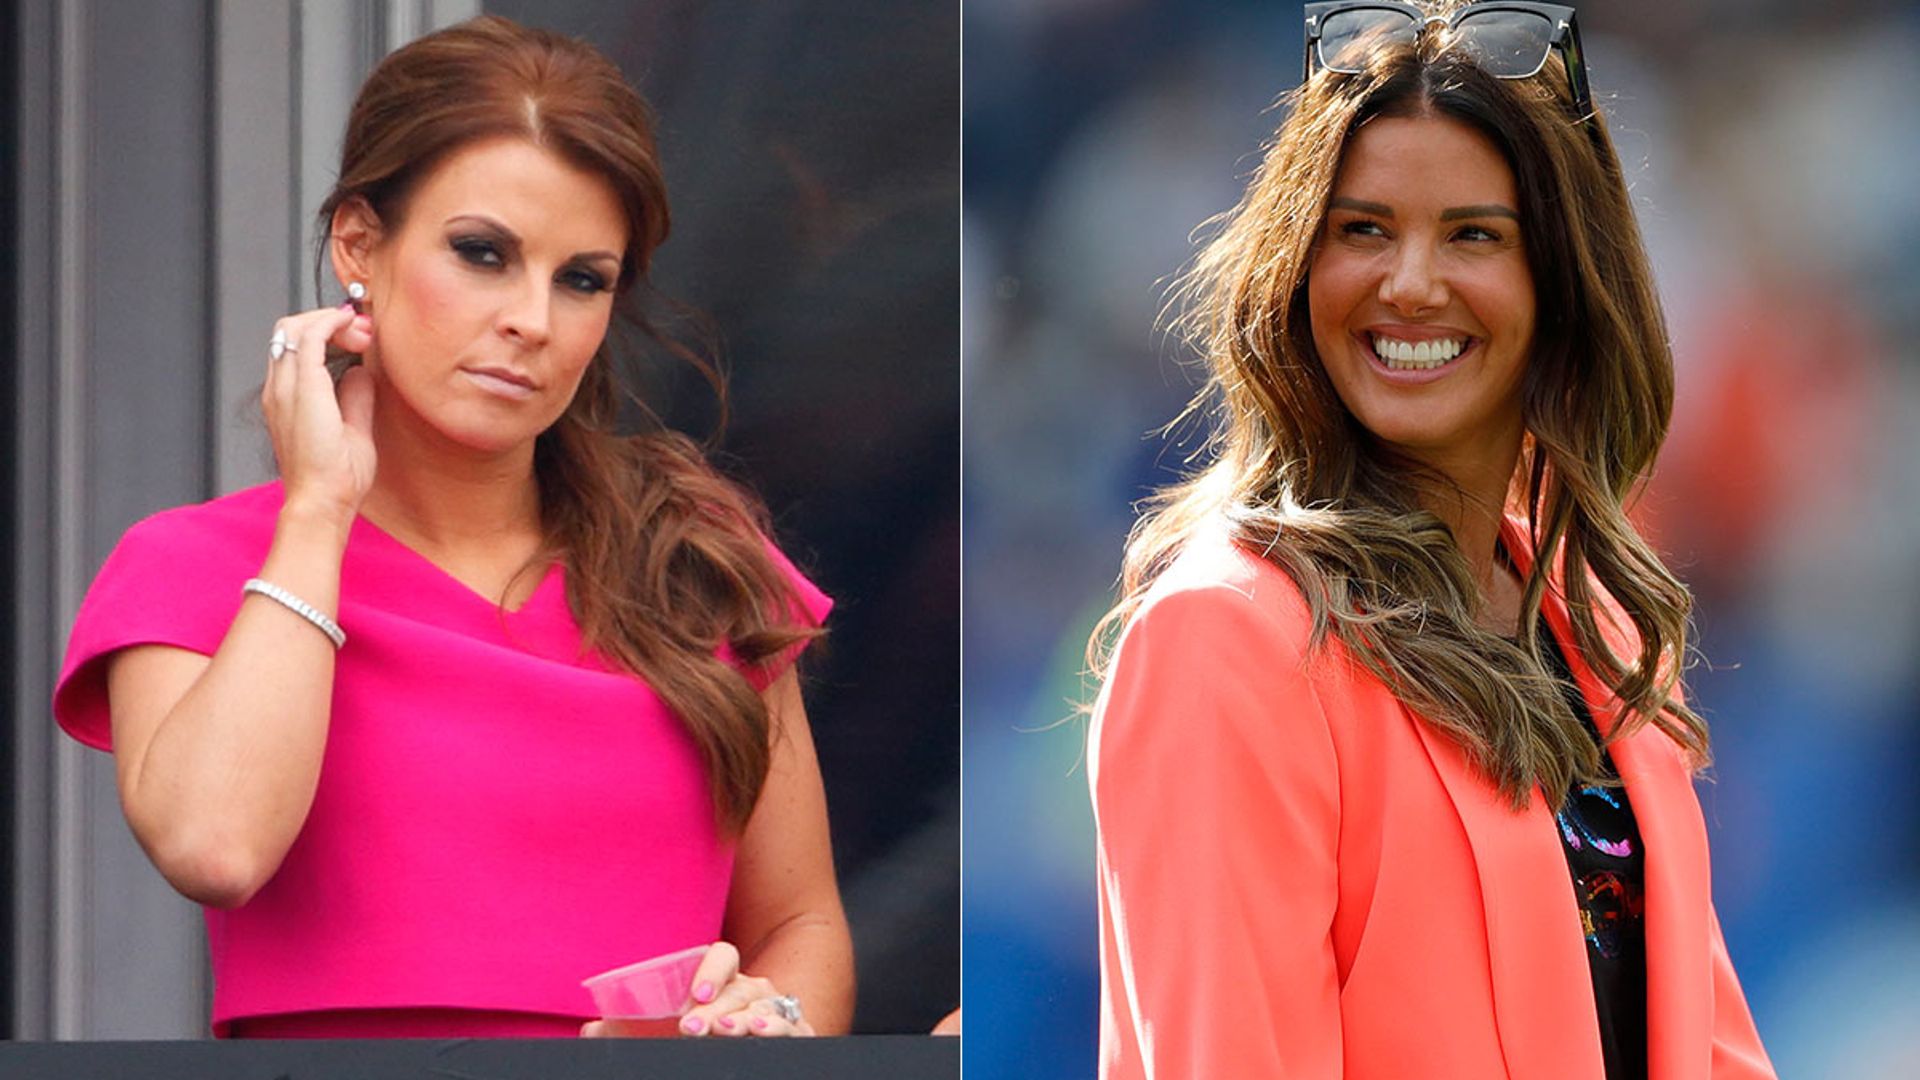 Rebekah Vardy Reacts To Coleen Rooney Accusing Her Of Leaking Private Information From Instagram 